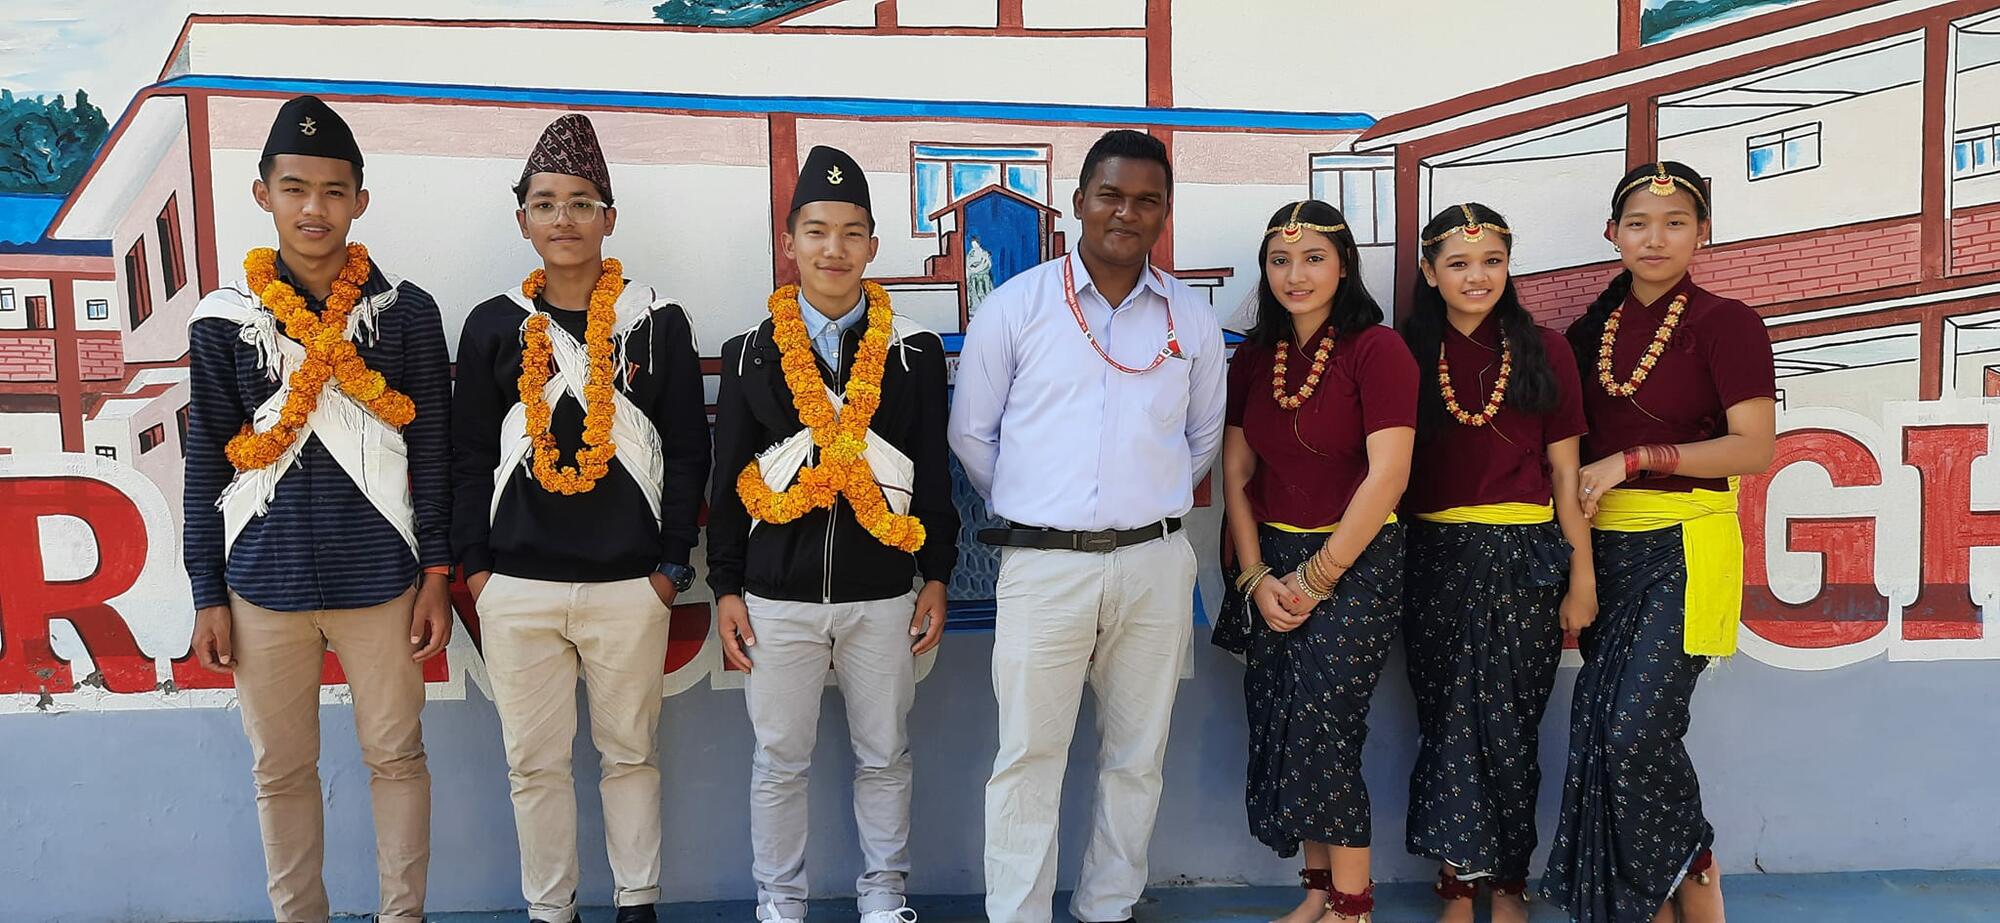 Principal with students